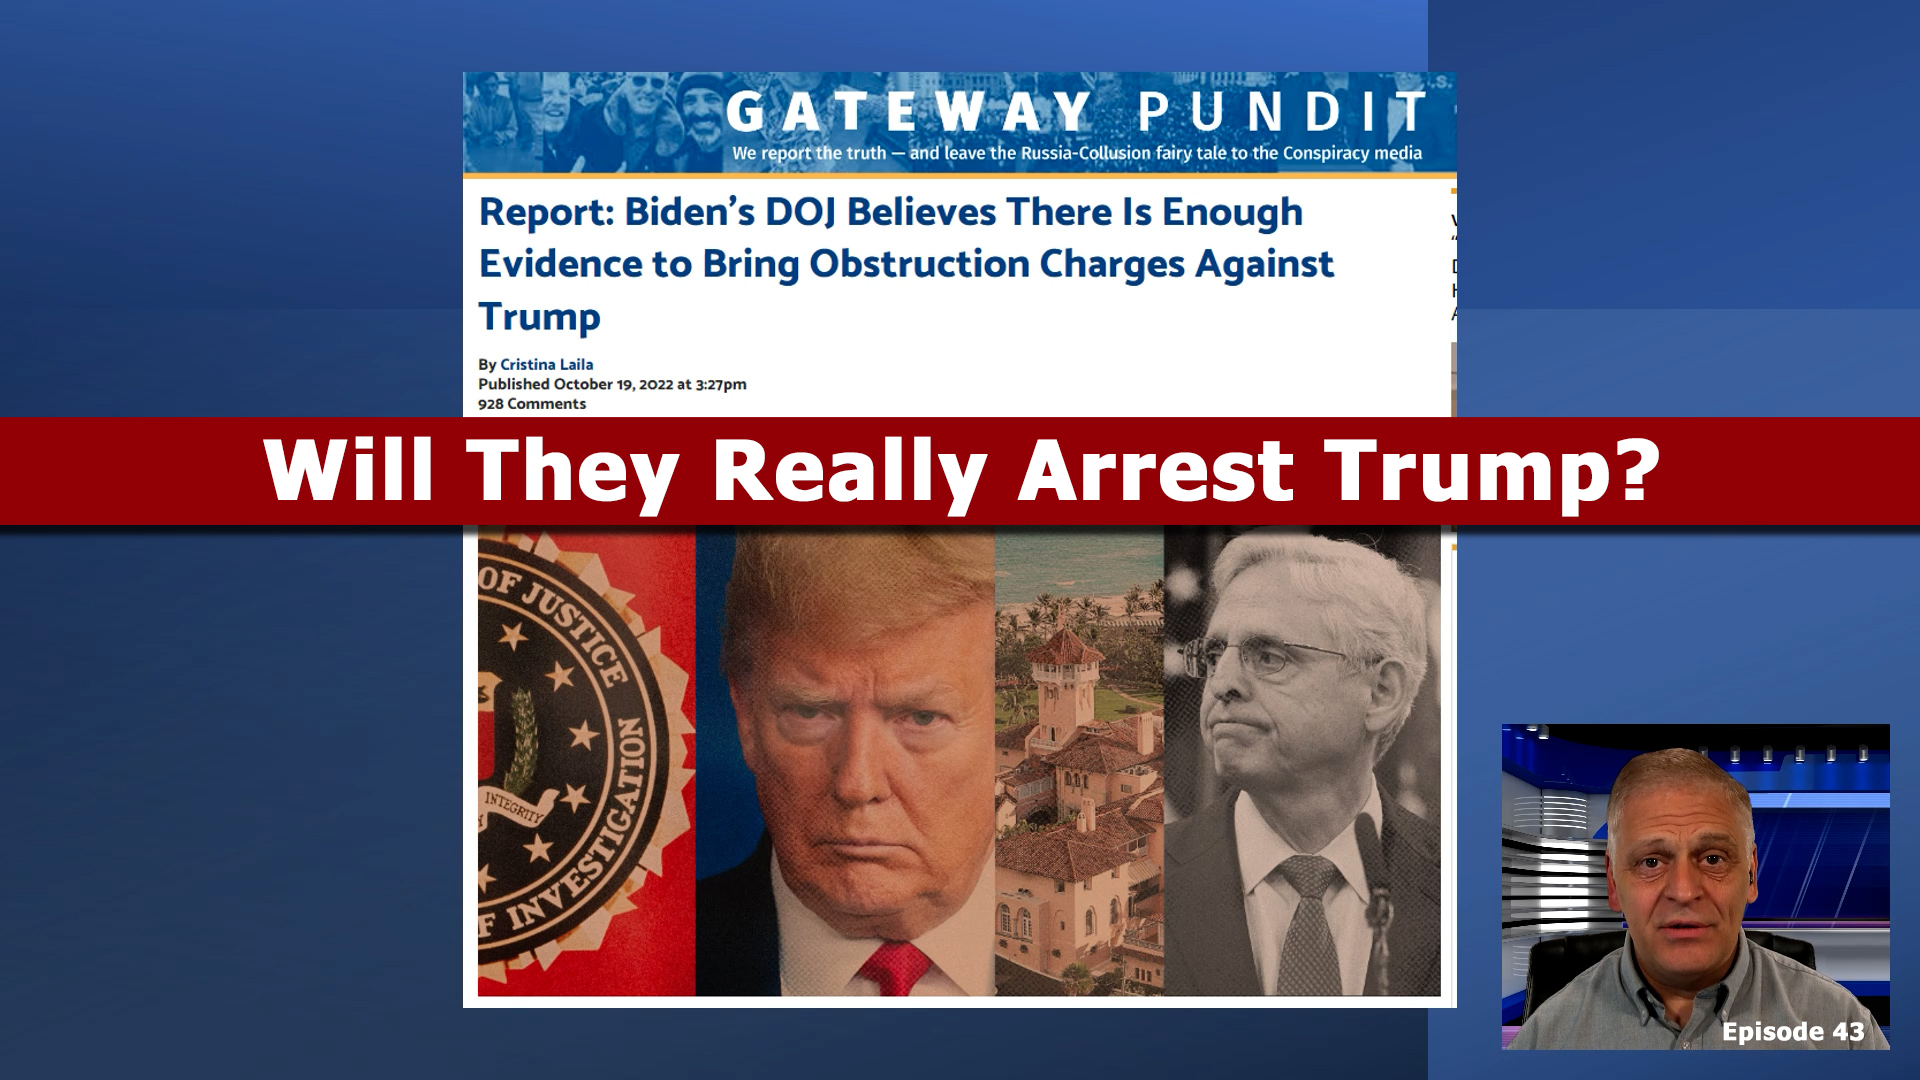 Will They Really Arrest Trump?